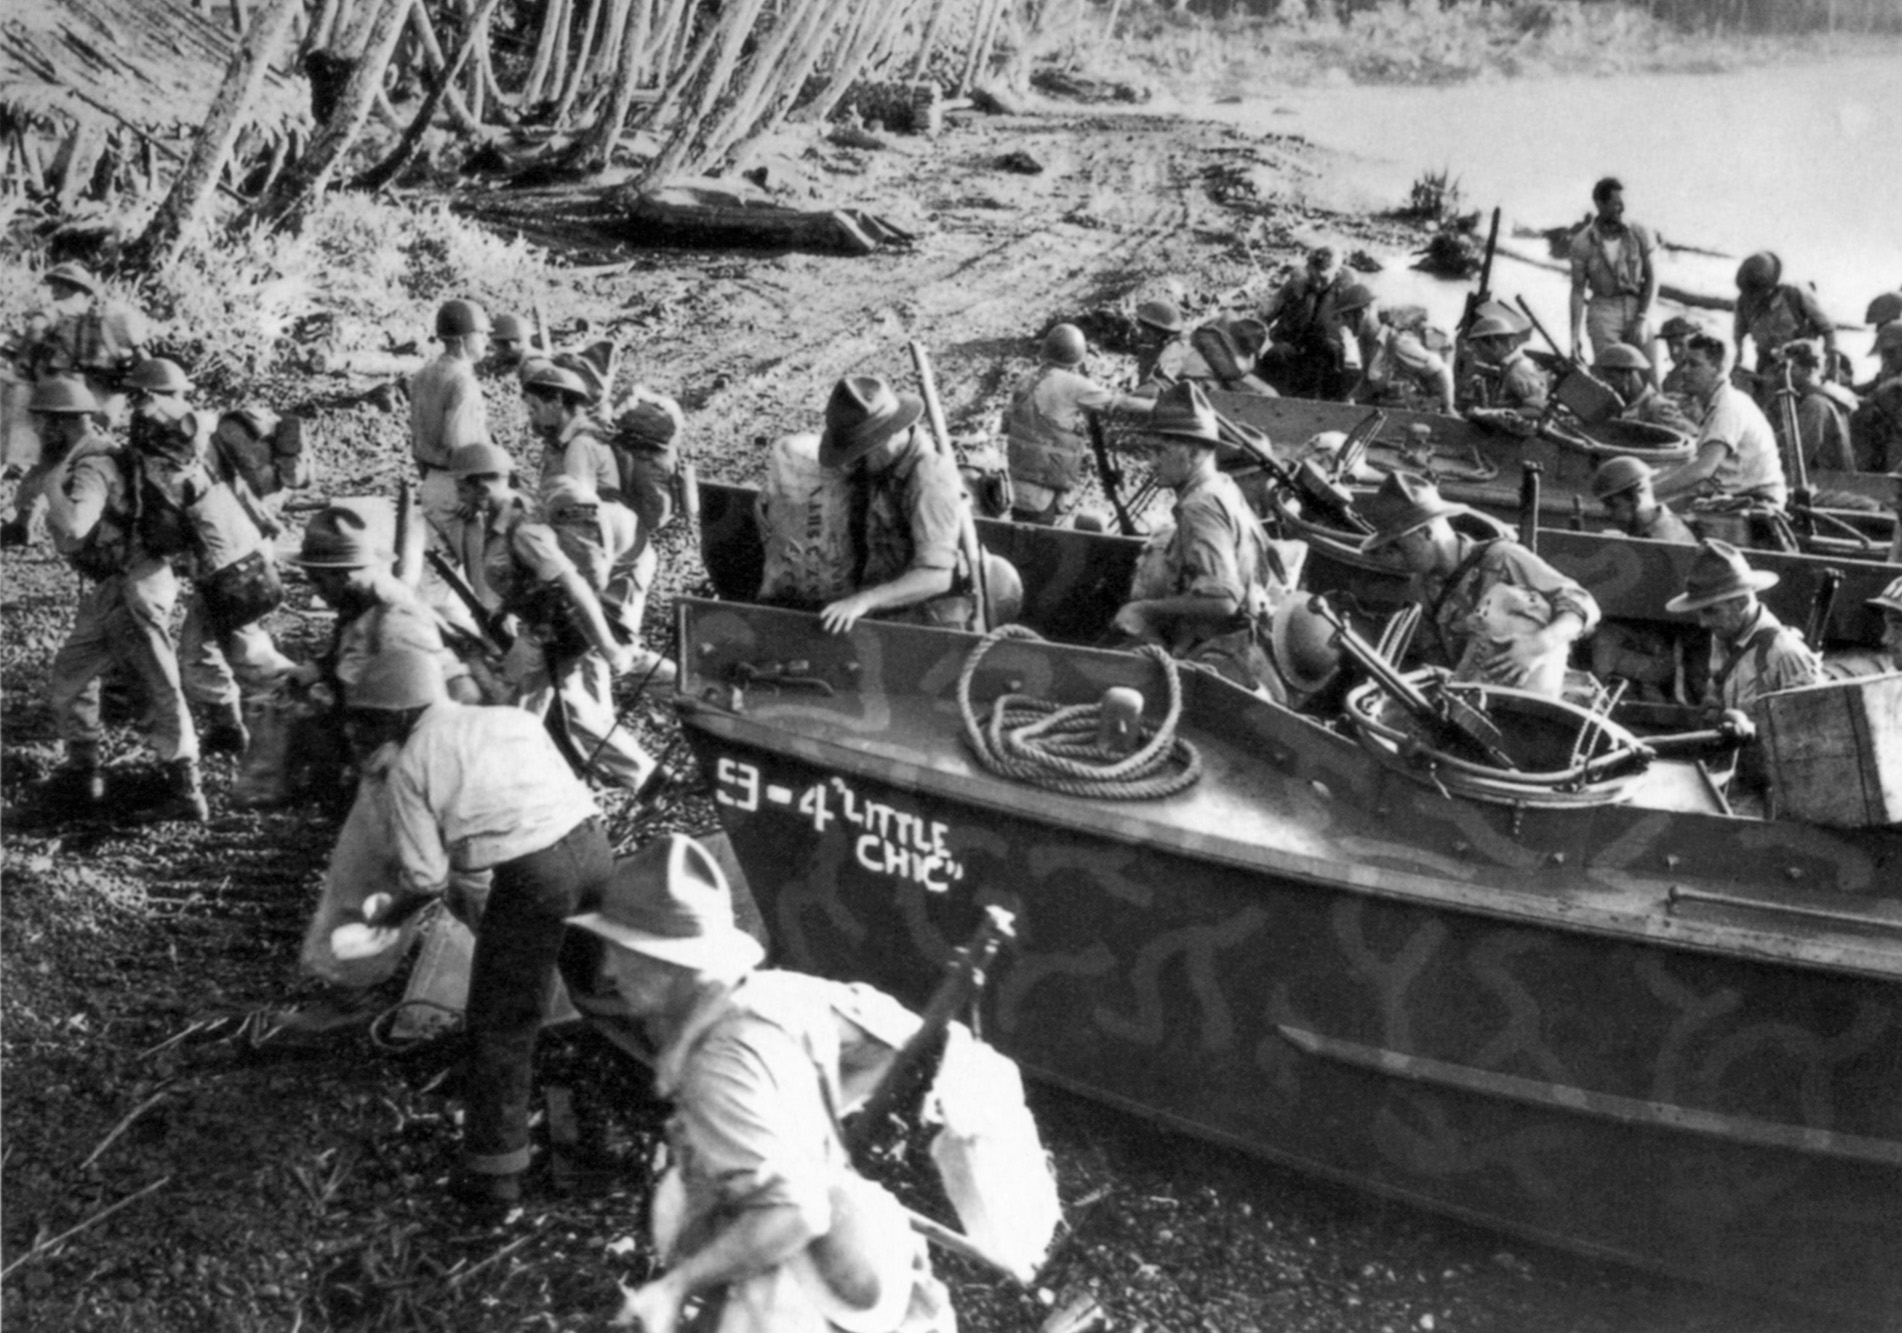 British soldiers exit landing craft and head into the thicket on a mission to relieve their American allies.